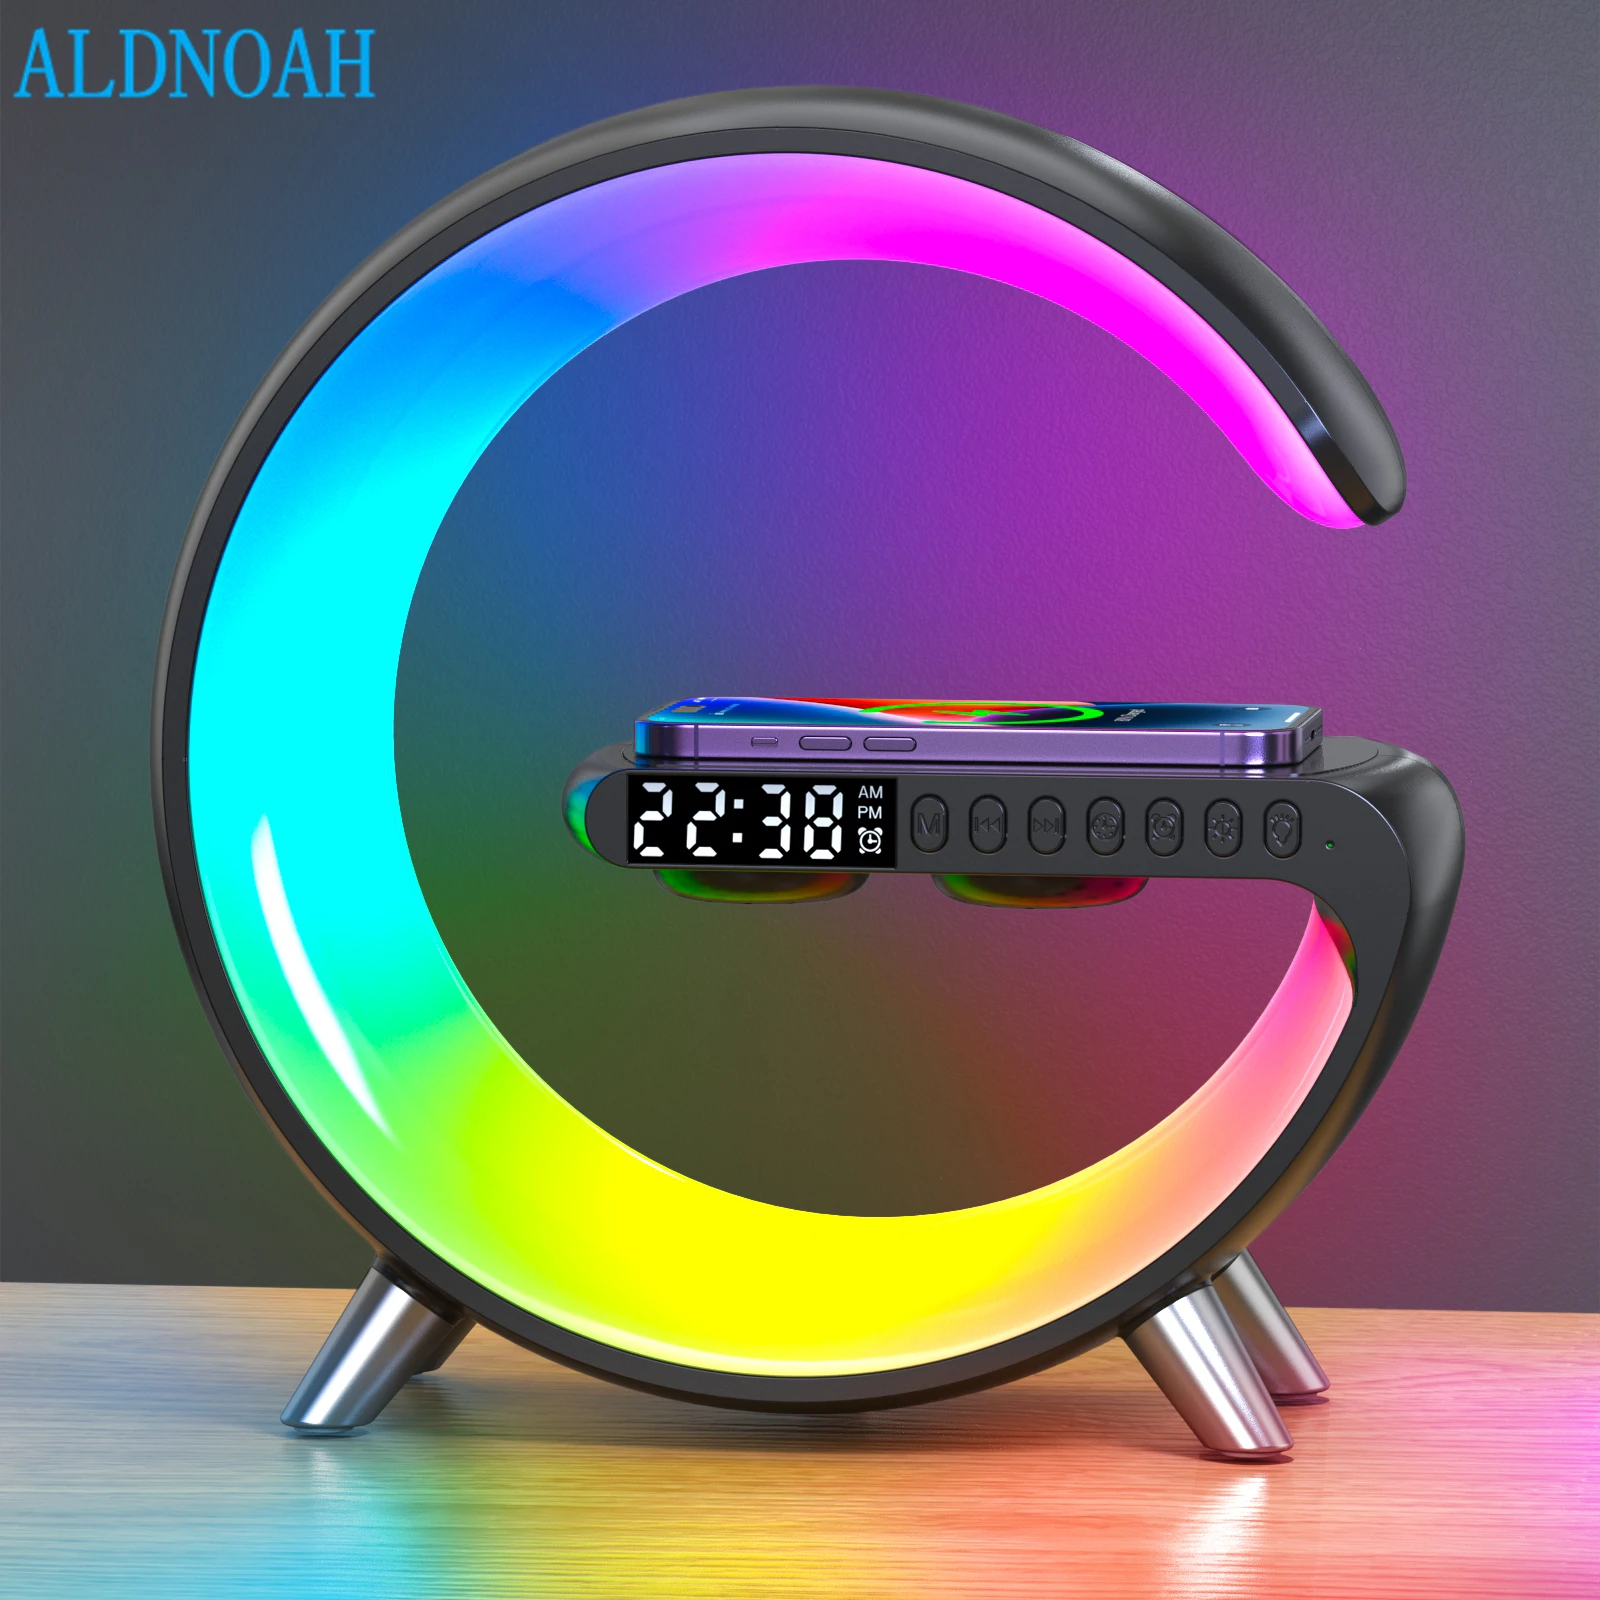 alarm-clock-wireless-charger-app-control-rgb-night-light-atmosphere-sleep-aid-lamp-speaker-charging-station-for-iphone-samsung